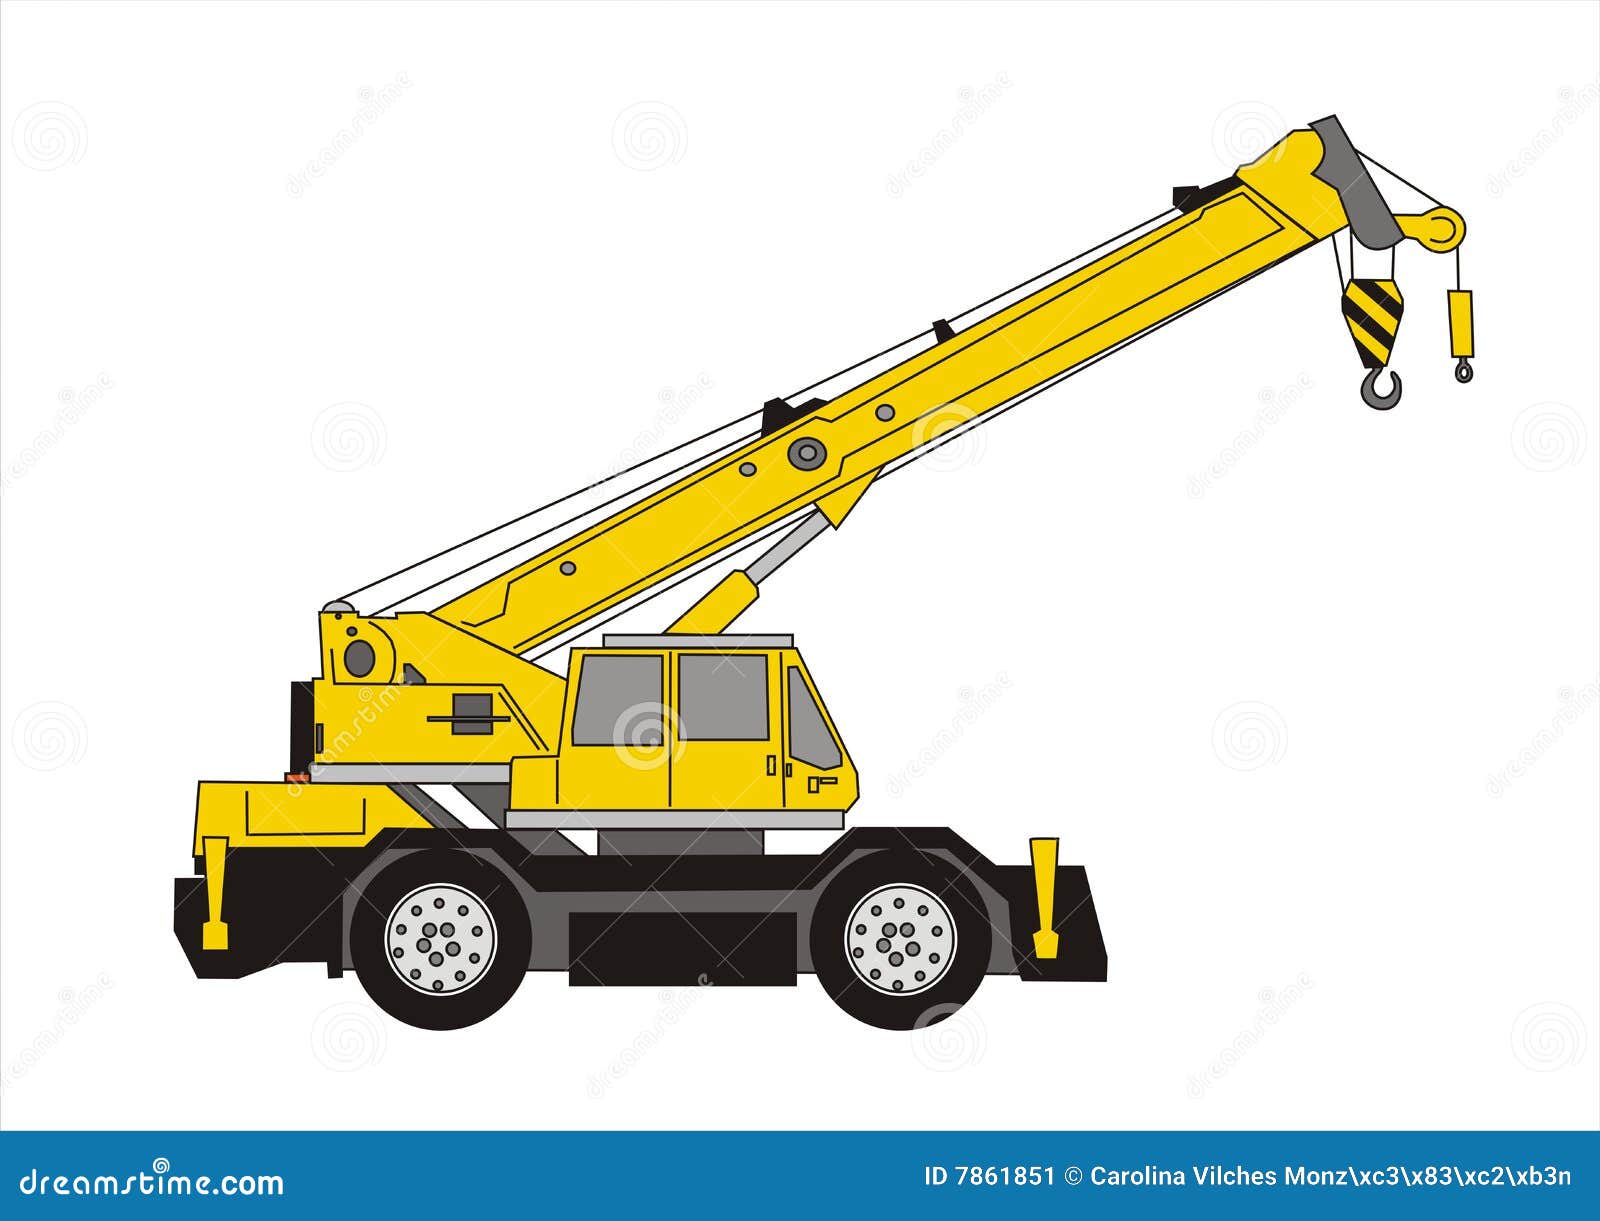 How to Draw a Crane Truck  Step by Step Easy Drawing Guides  Drawing  Howtos